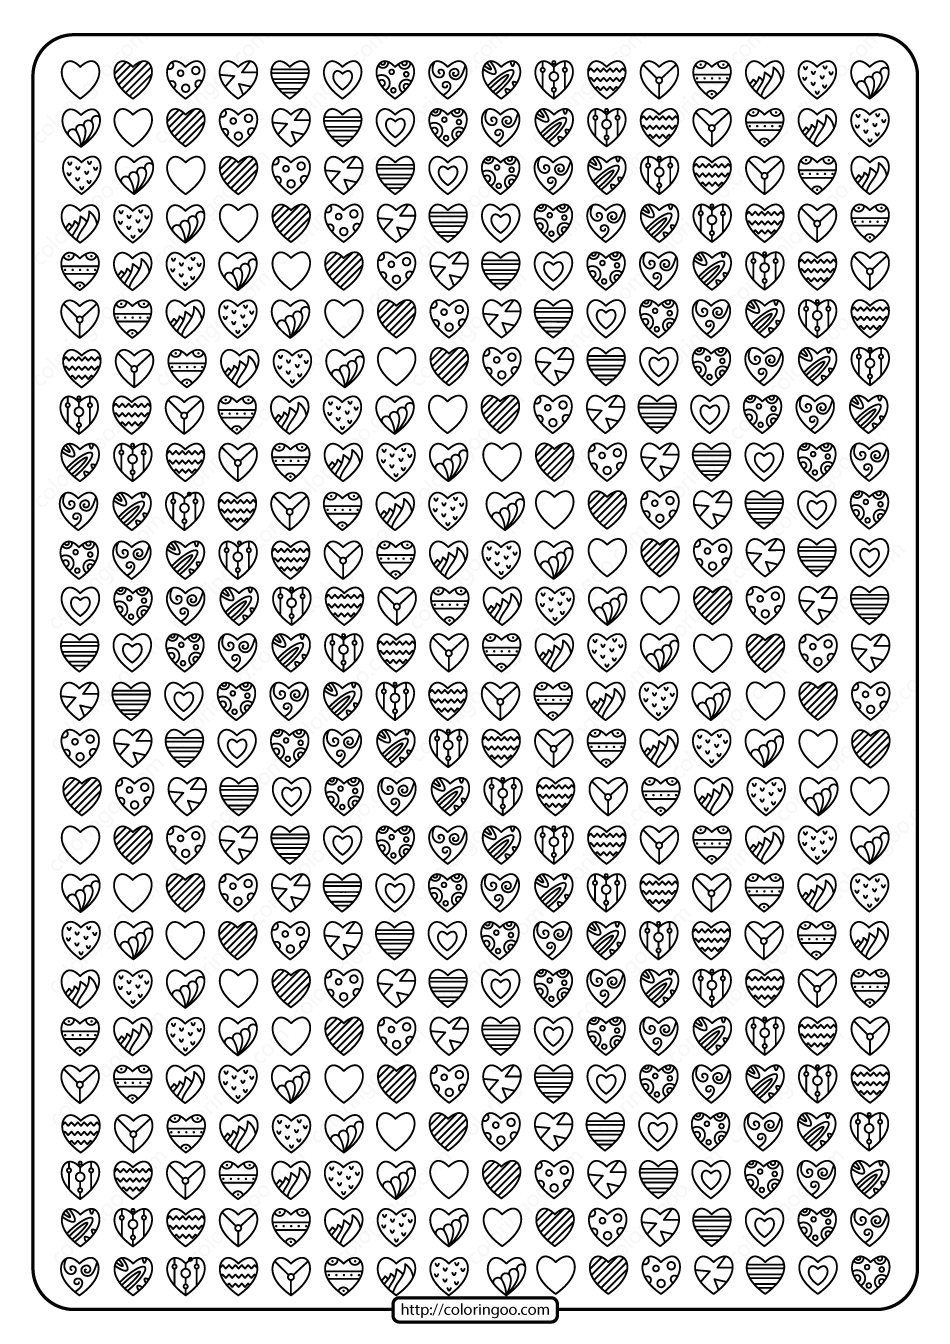 Free Printable Lots of Hearts Pdf Coloring Page